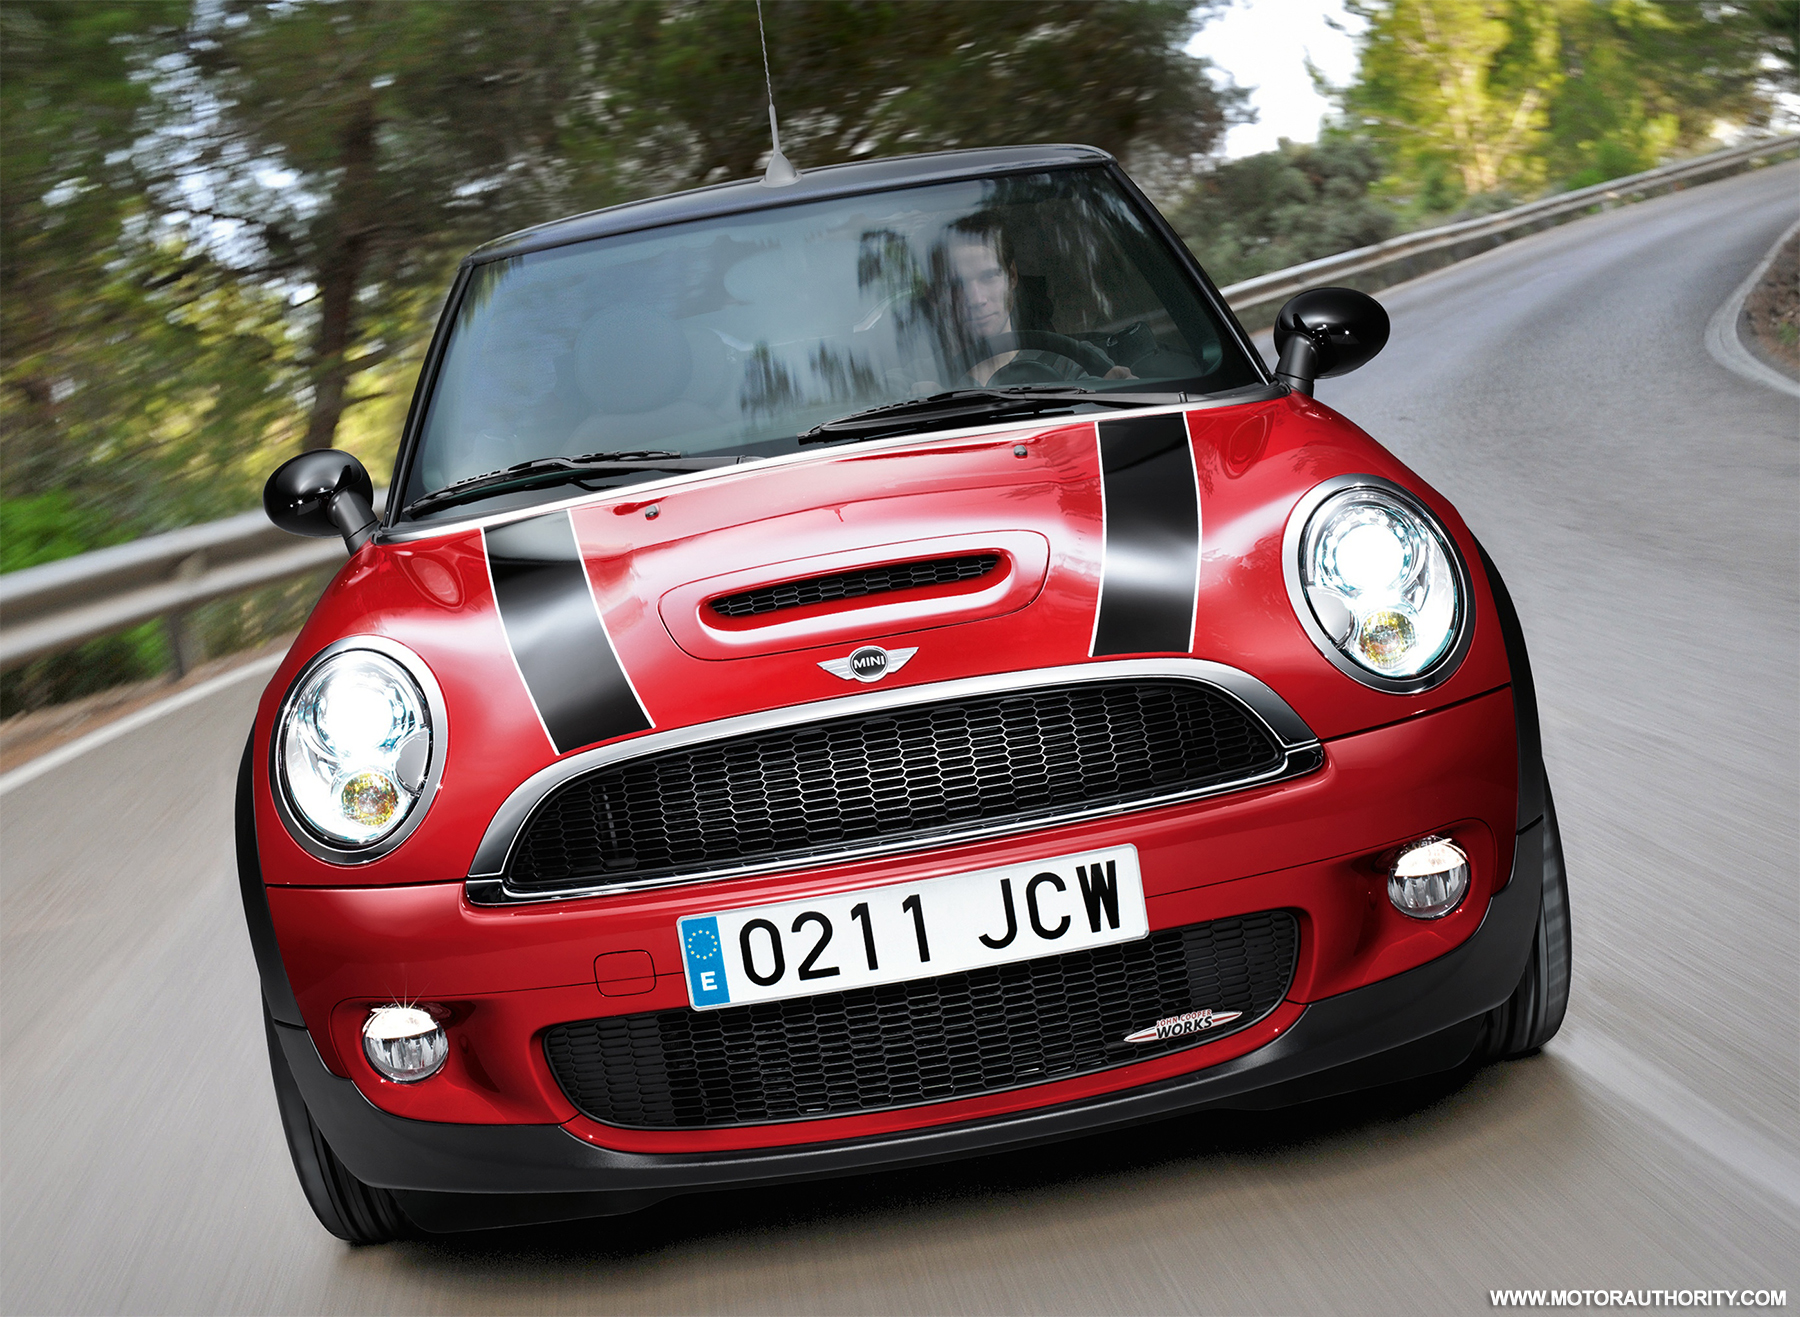 88,911 2007-2011 MINI Cooper S, Clubman, JCW Models Recalled For Fire Risk